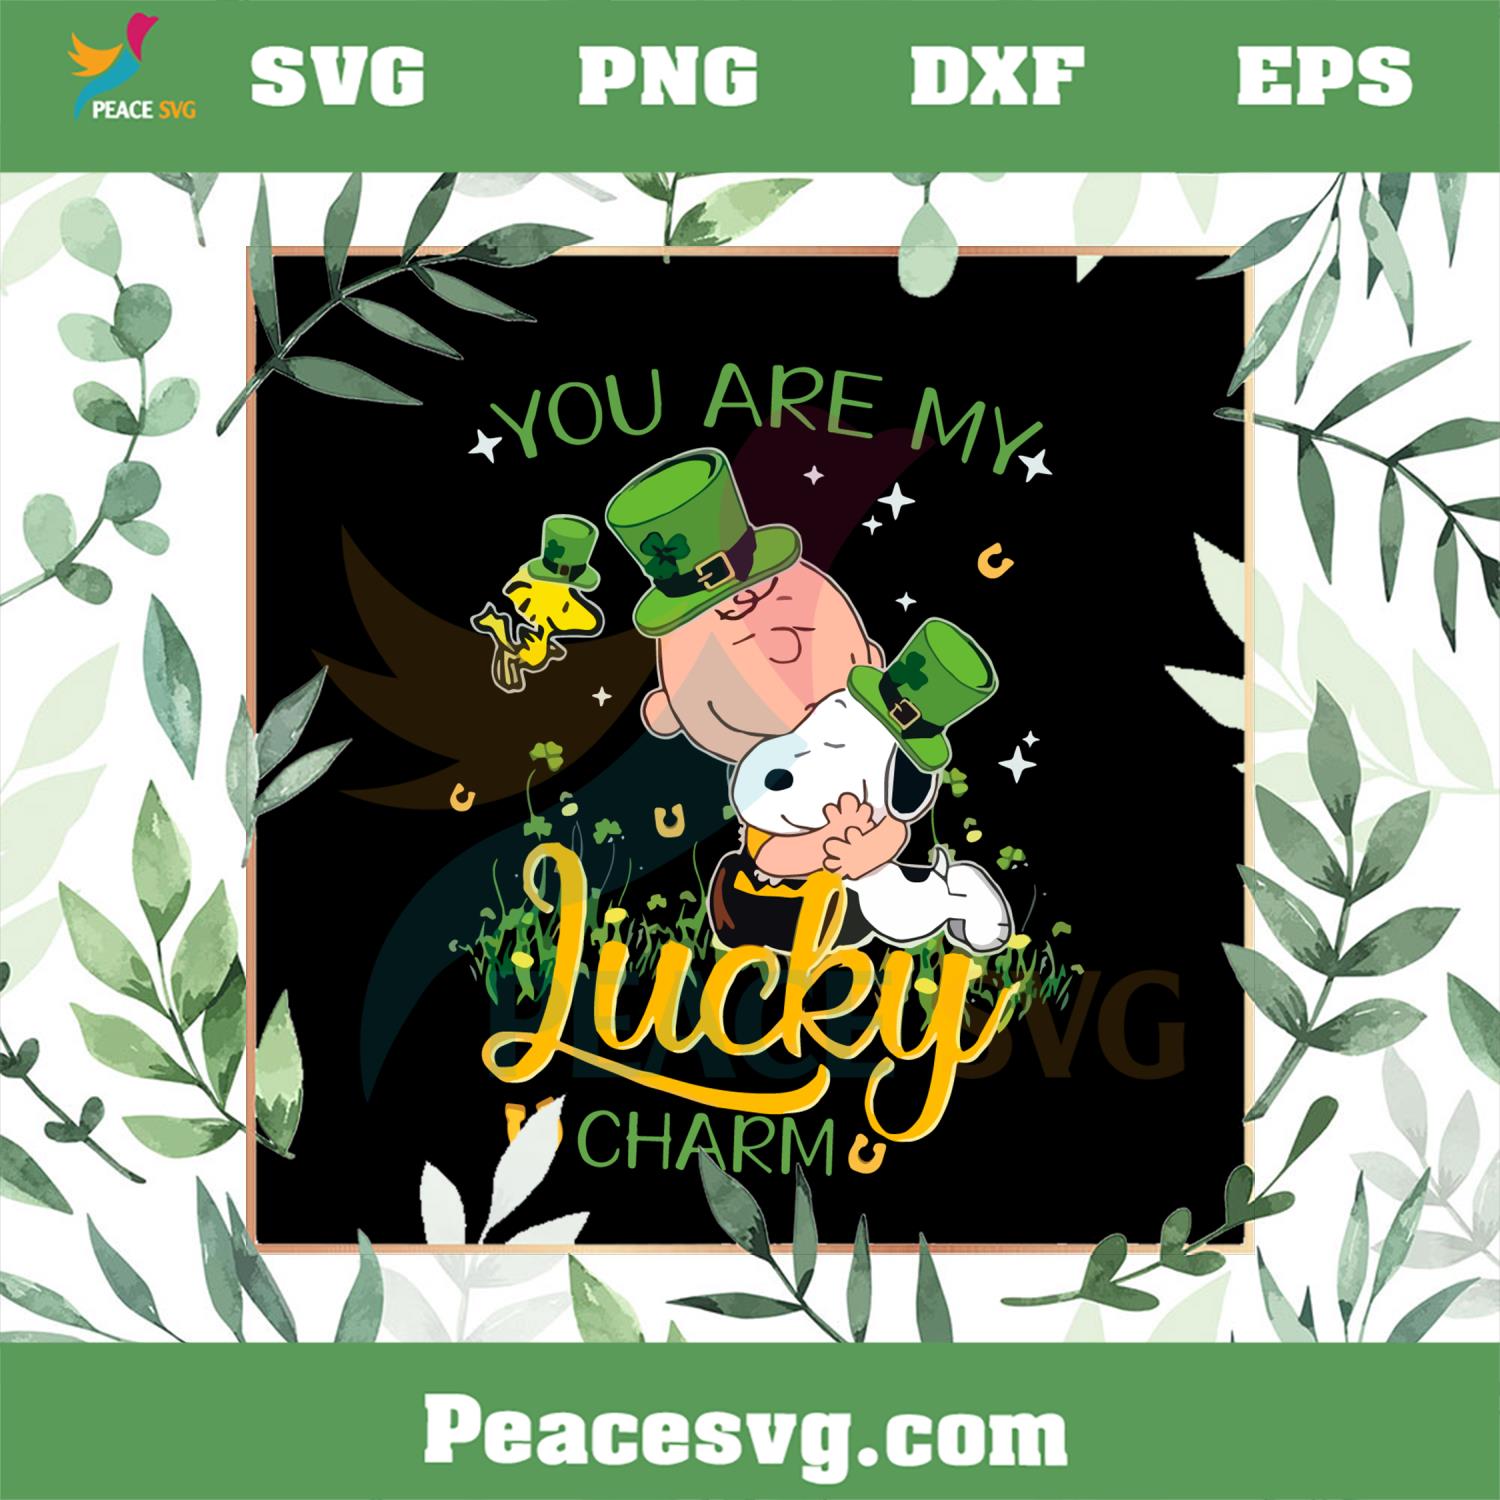 You Are My Lucky Charm Saint Patrick’s Day Snoopy Dog SVG Cutting Files